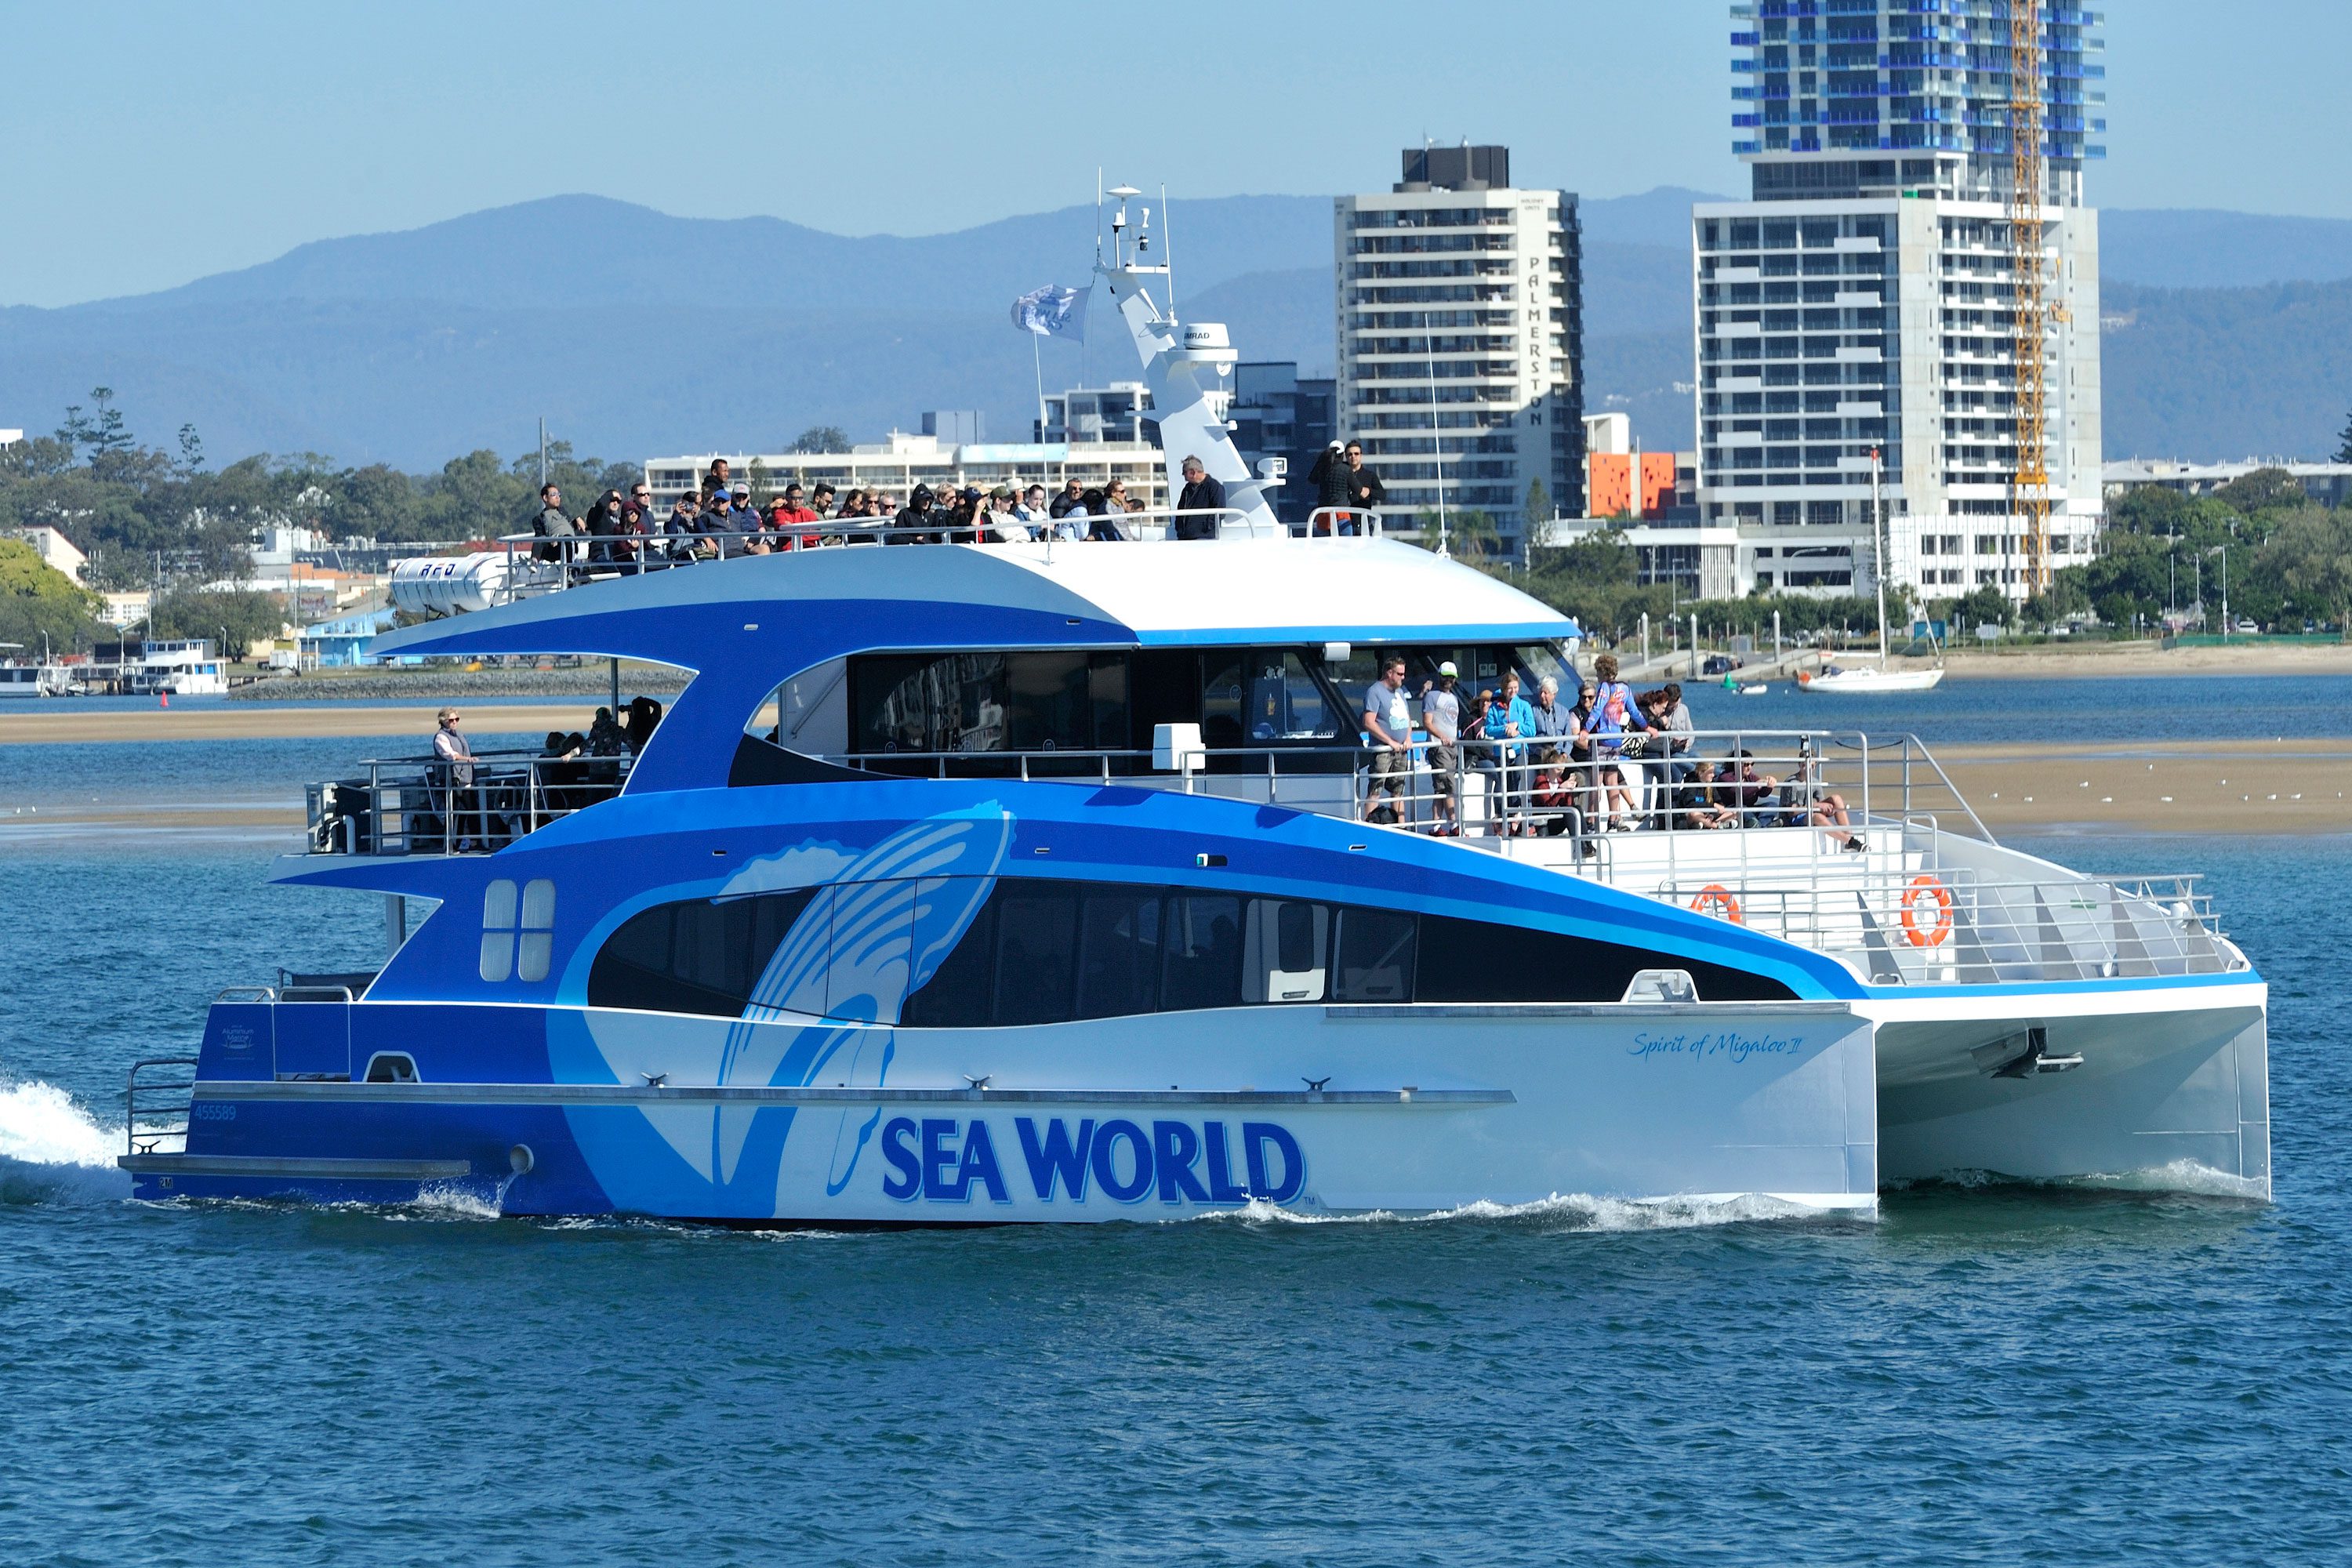 Australia’s Most Advanced Whale Watching Vessel Operating in the Gold Coast